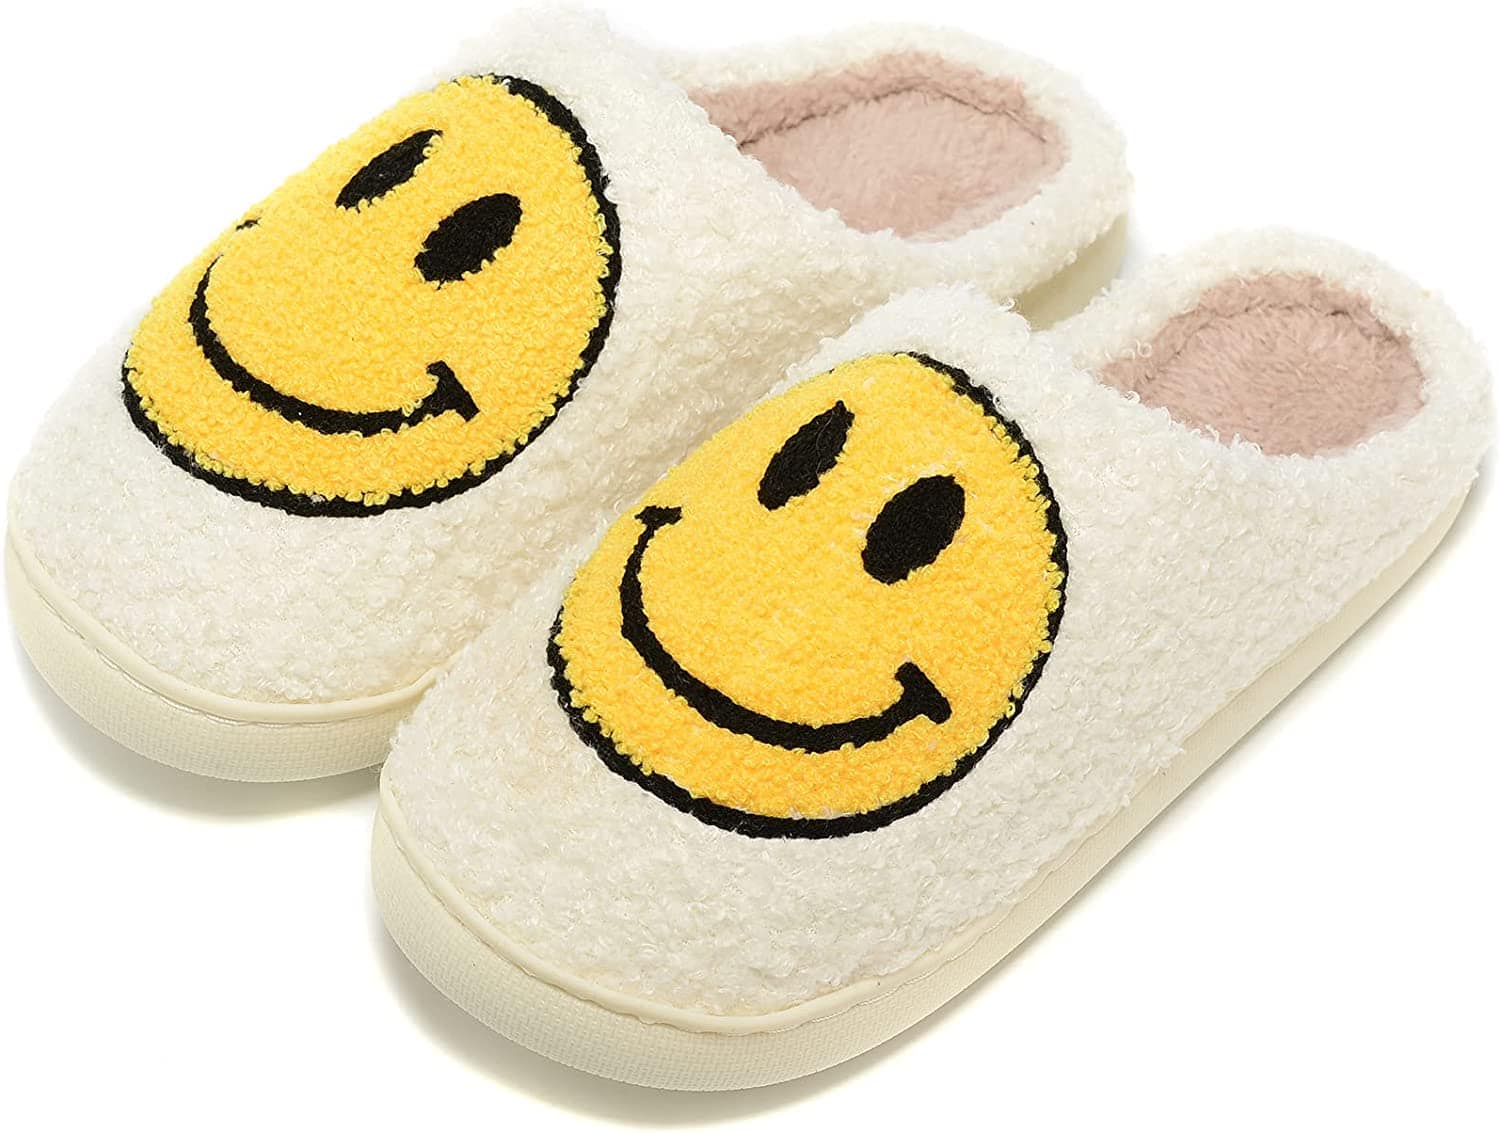 Smiley face slippers